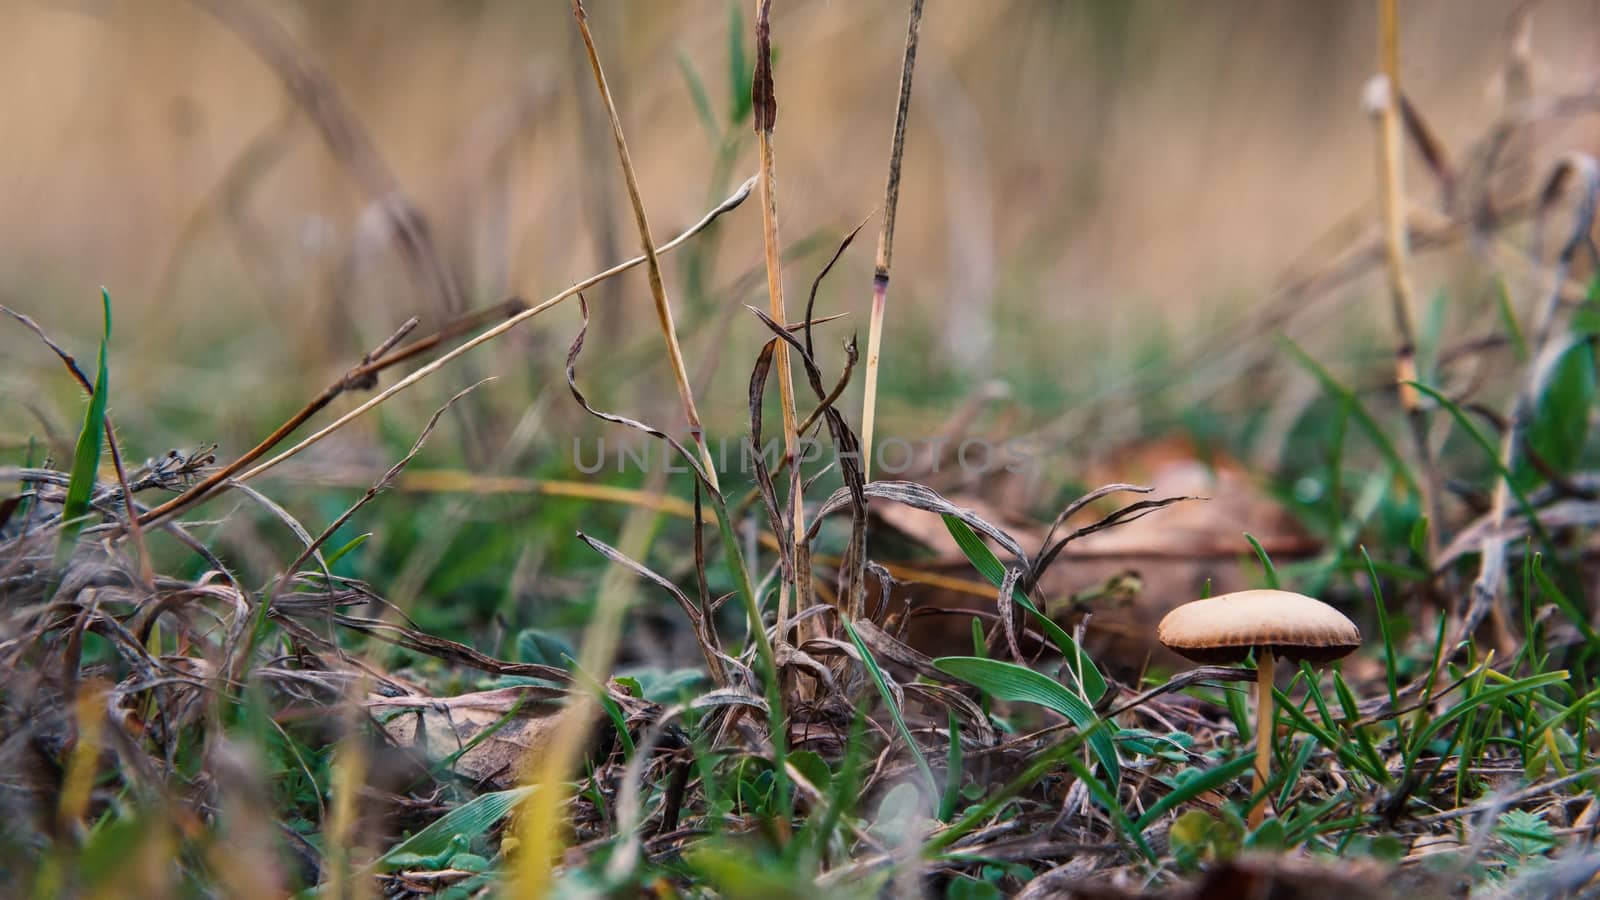 Forest little brown mushroom in the grass by WolfWilhelm